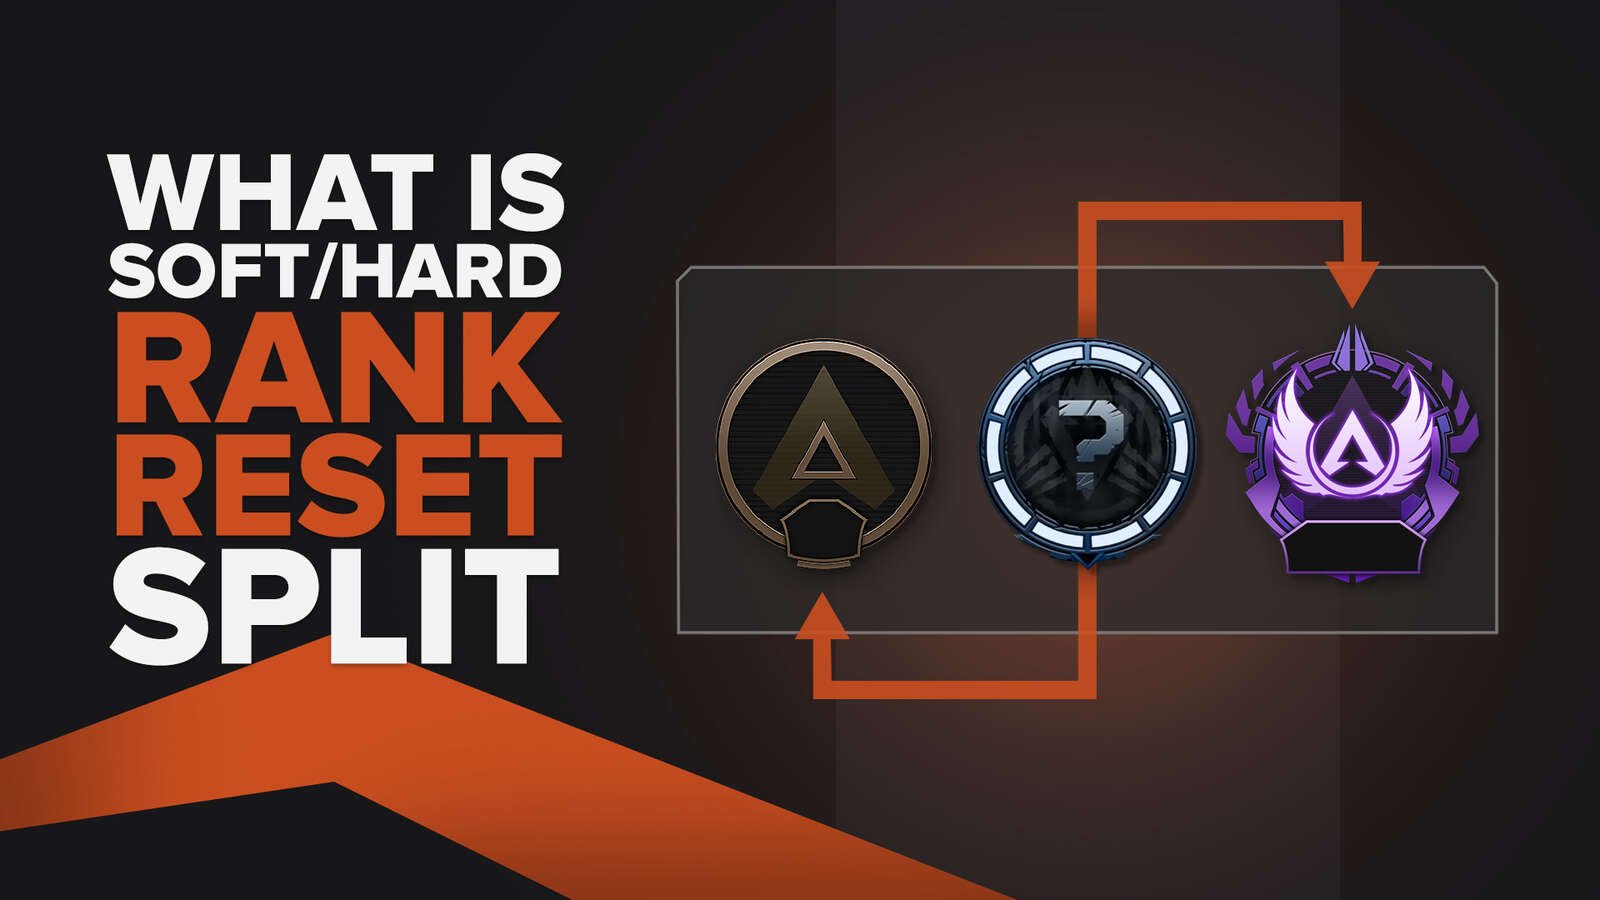 What is the Soft/hard rank reset split in Apex Legends. How does it work?